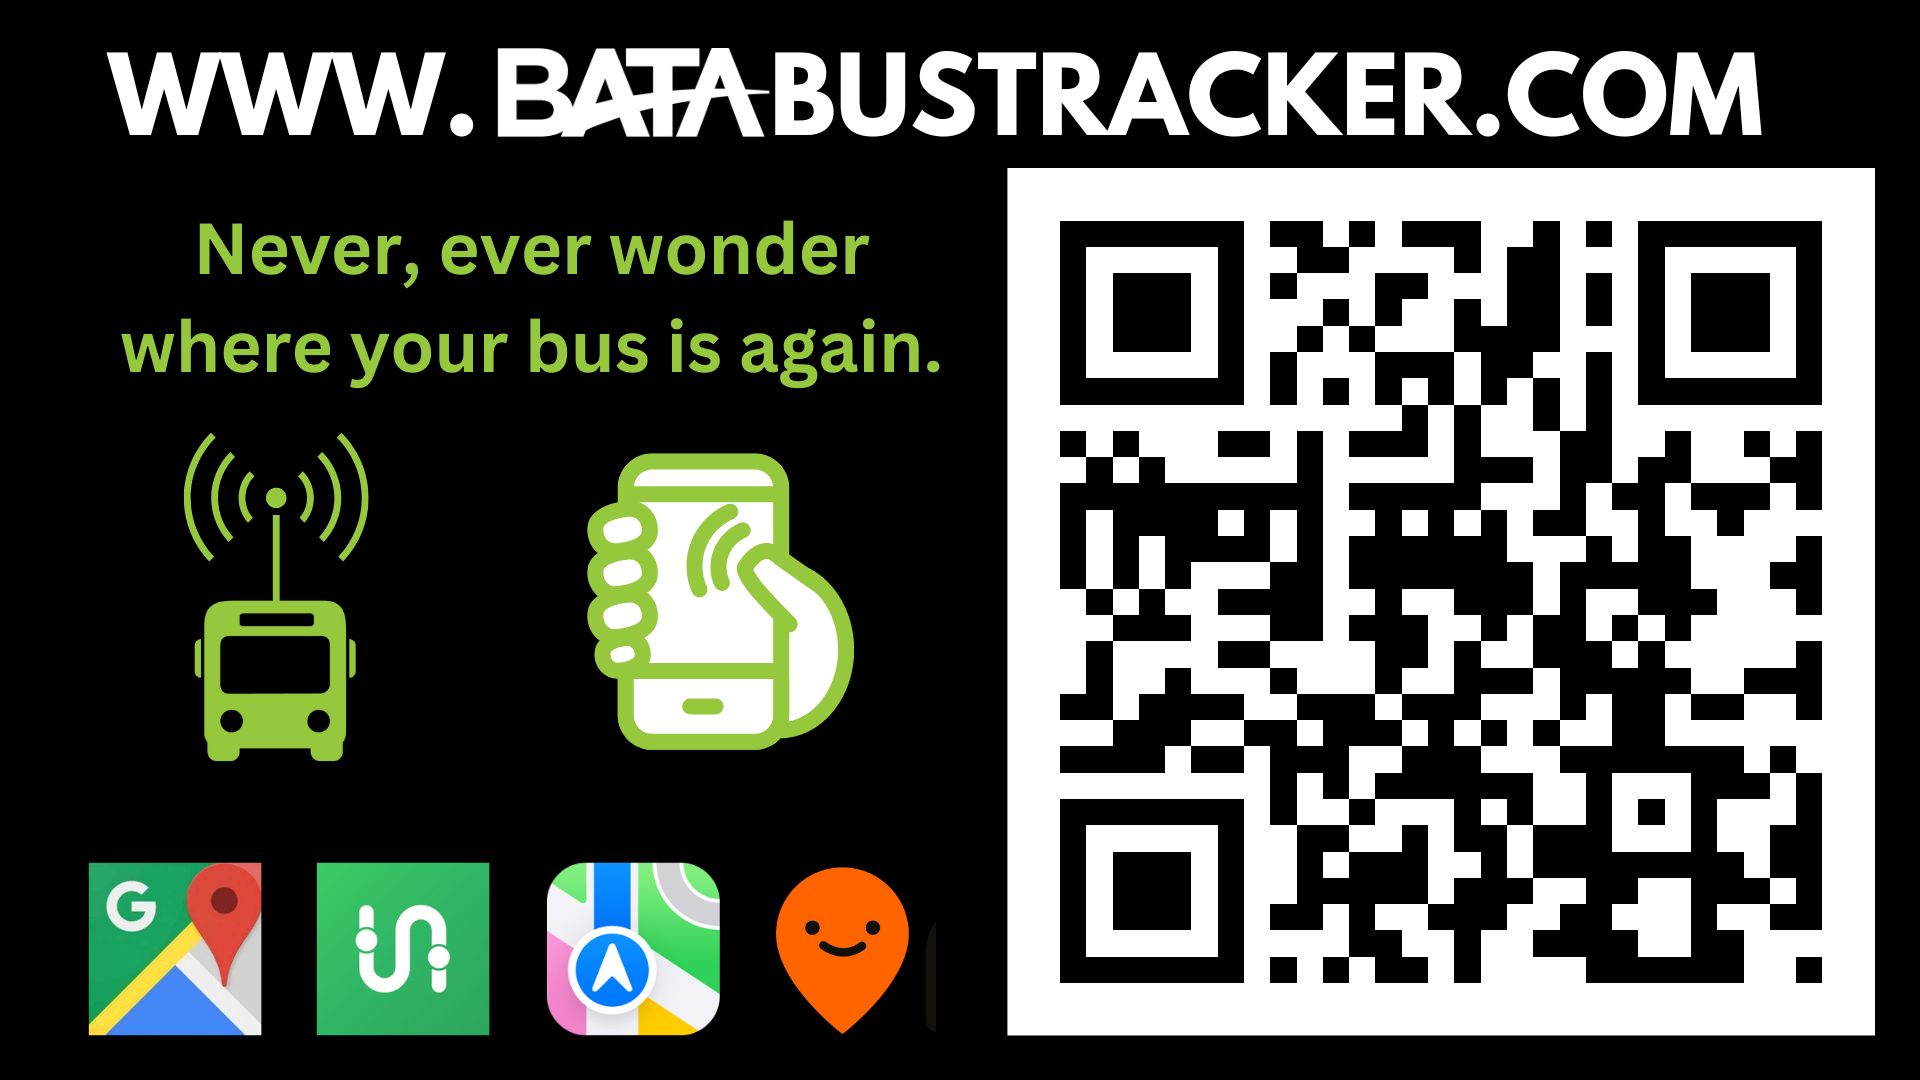 Never, ever wonder where your bus is again - www.batabustracker.com